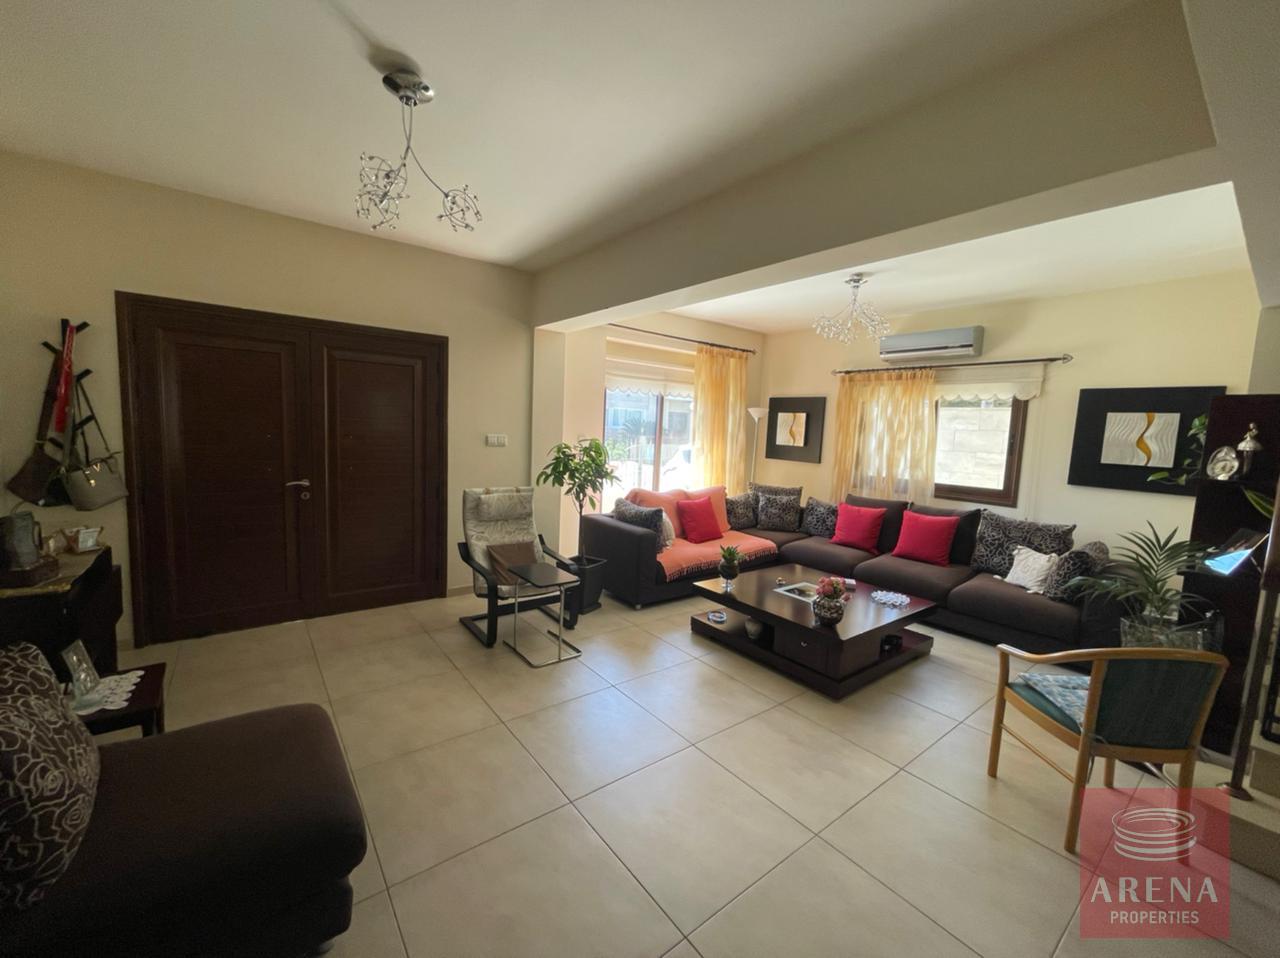 3 bed villa for sale in Strovolos - living area